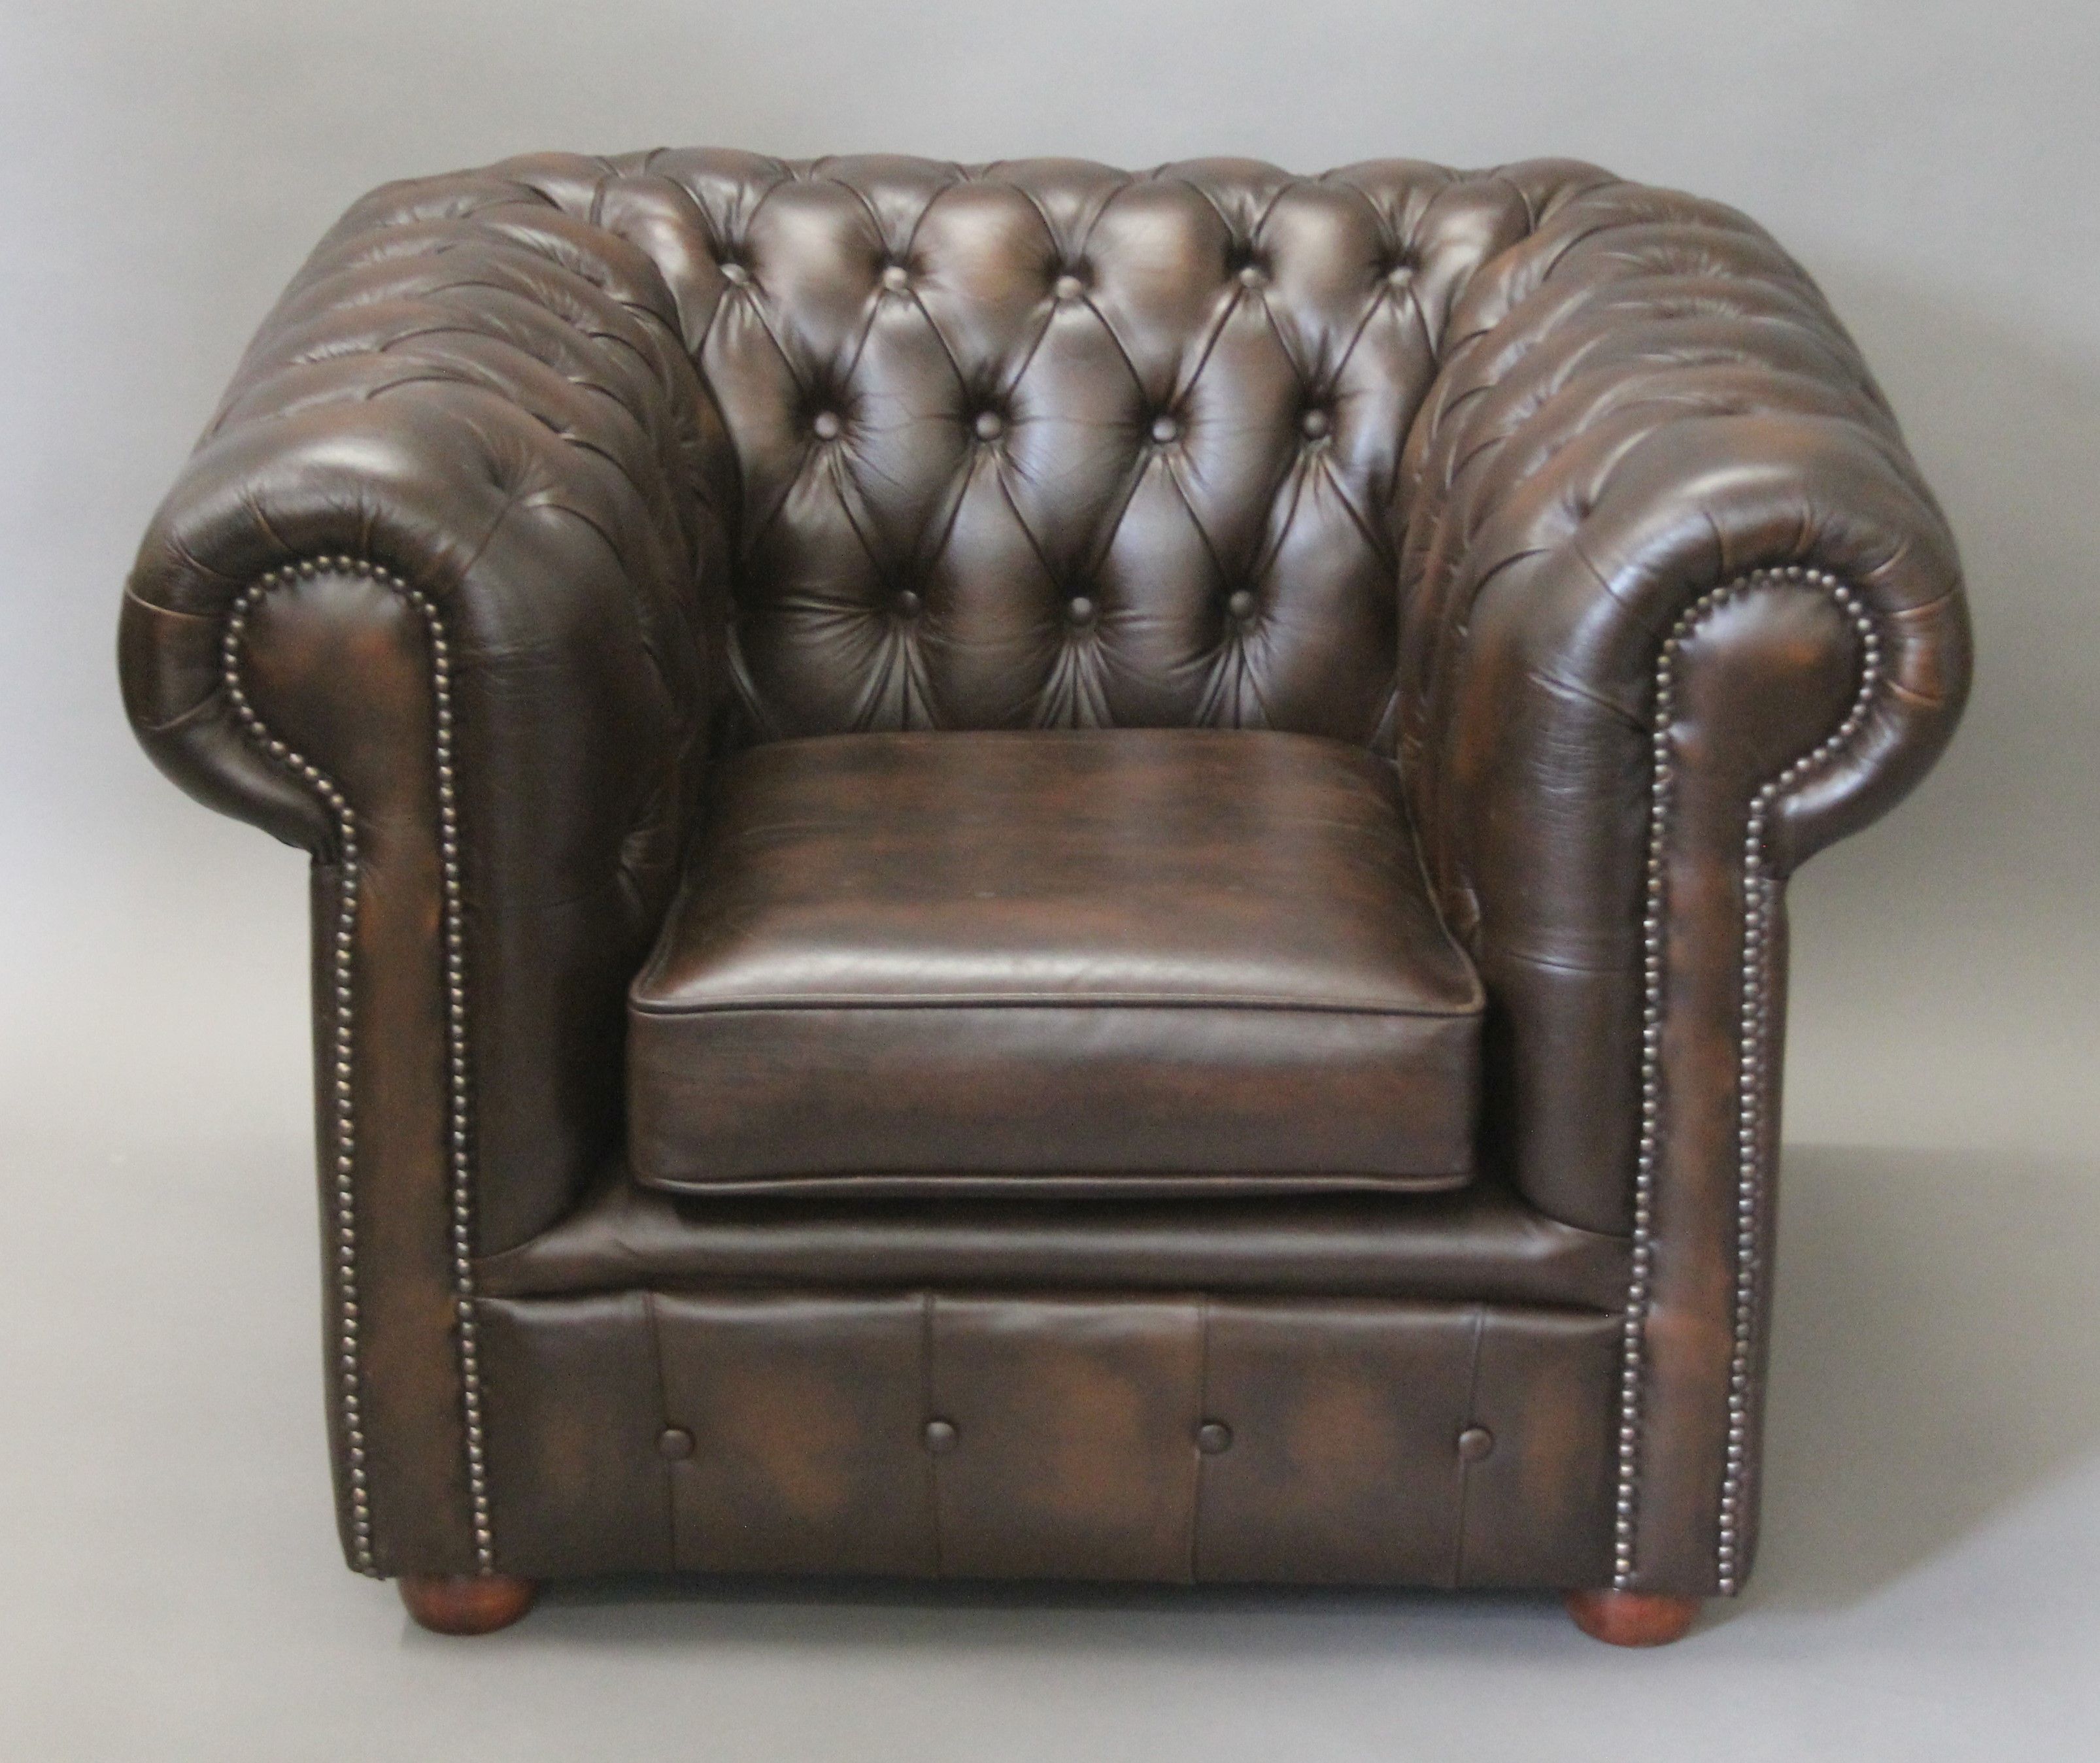 A Chesterfield type armchair. 98 cm wide.